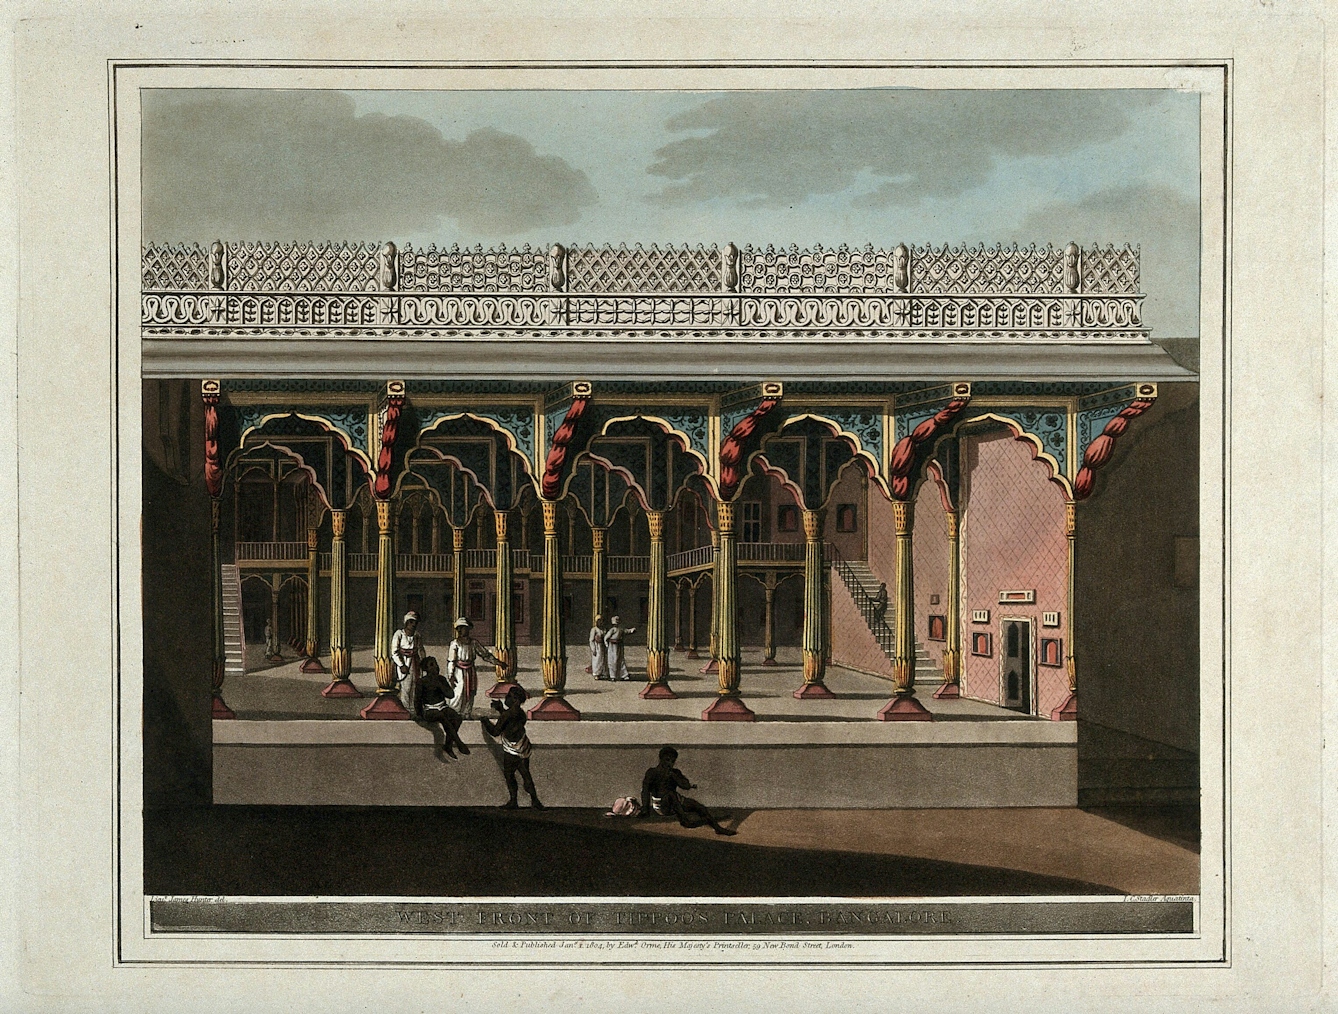 Coloured print - etching and aquatint with watercolour. The image shows Tipu's palace which is very opulent with pink walls and bright painted columns and paintings on display. There are a number of figures outside the palace, which are problematic due to their caricured nature. Text along the bottom reads 'West front of Tippoo's palace, Bangalore'. 